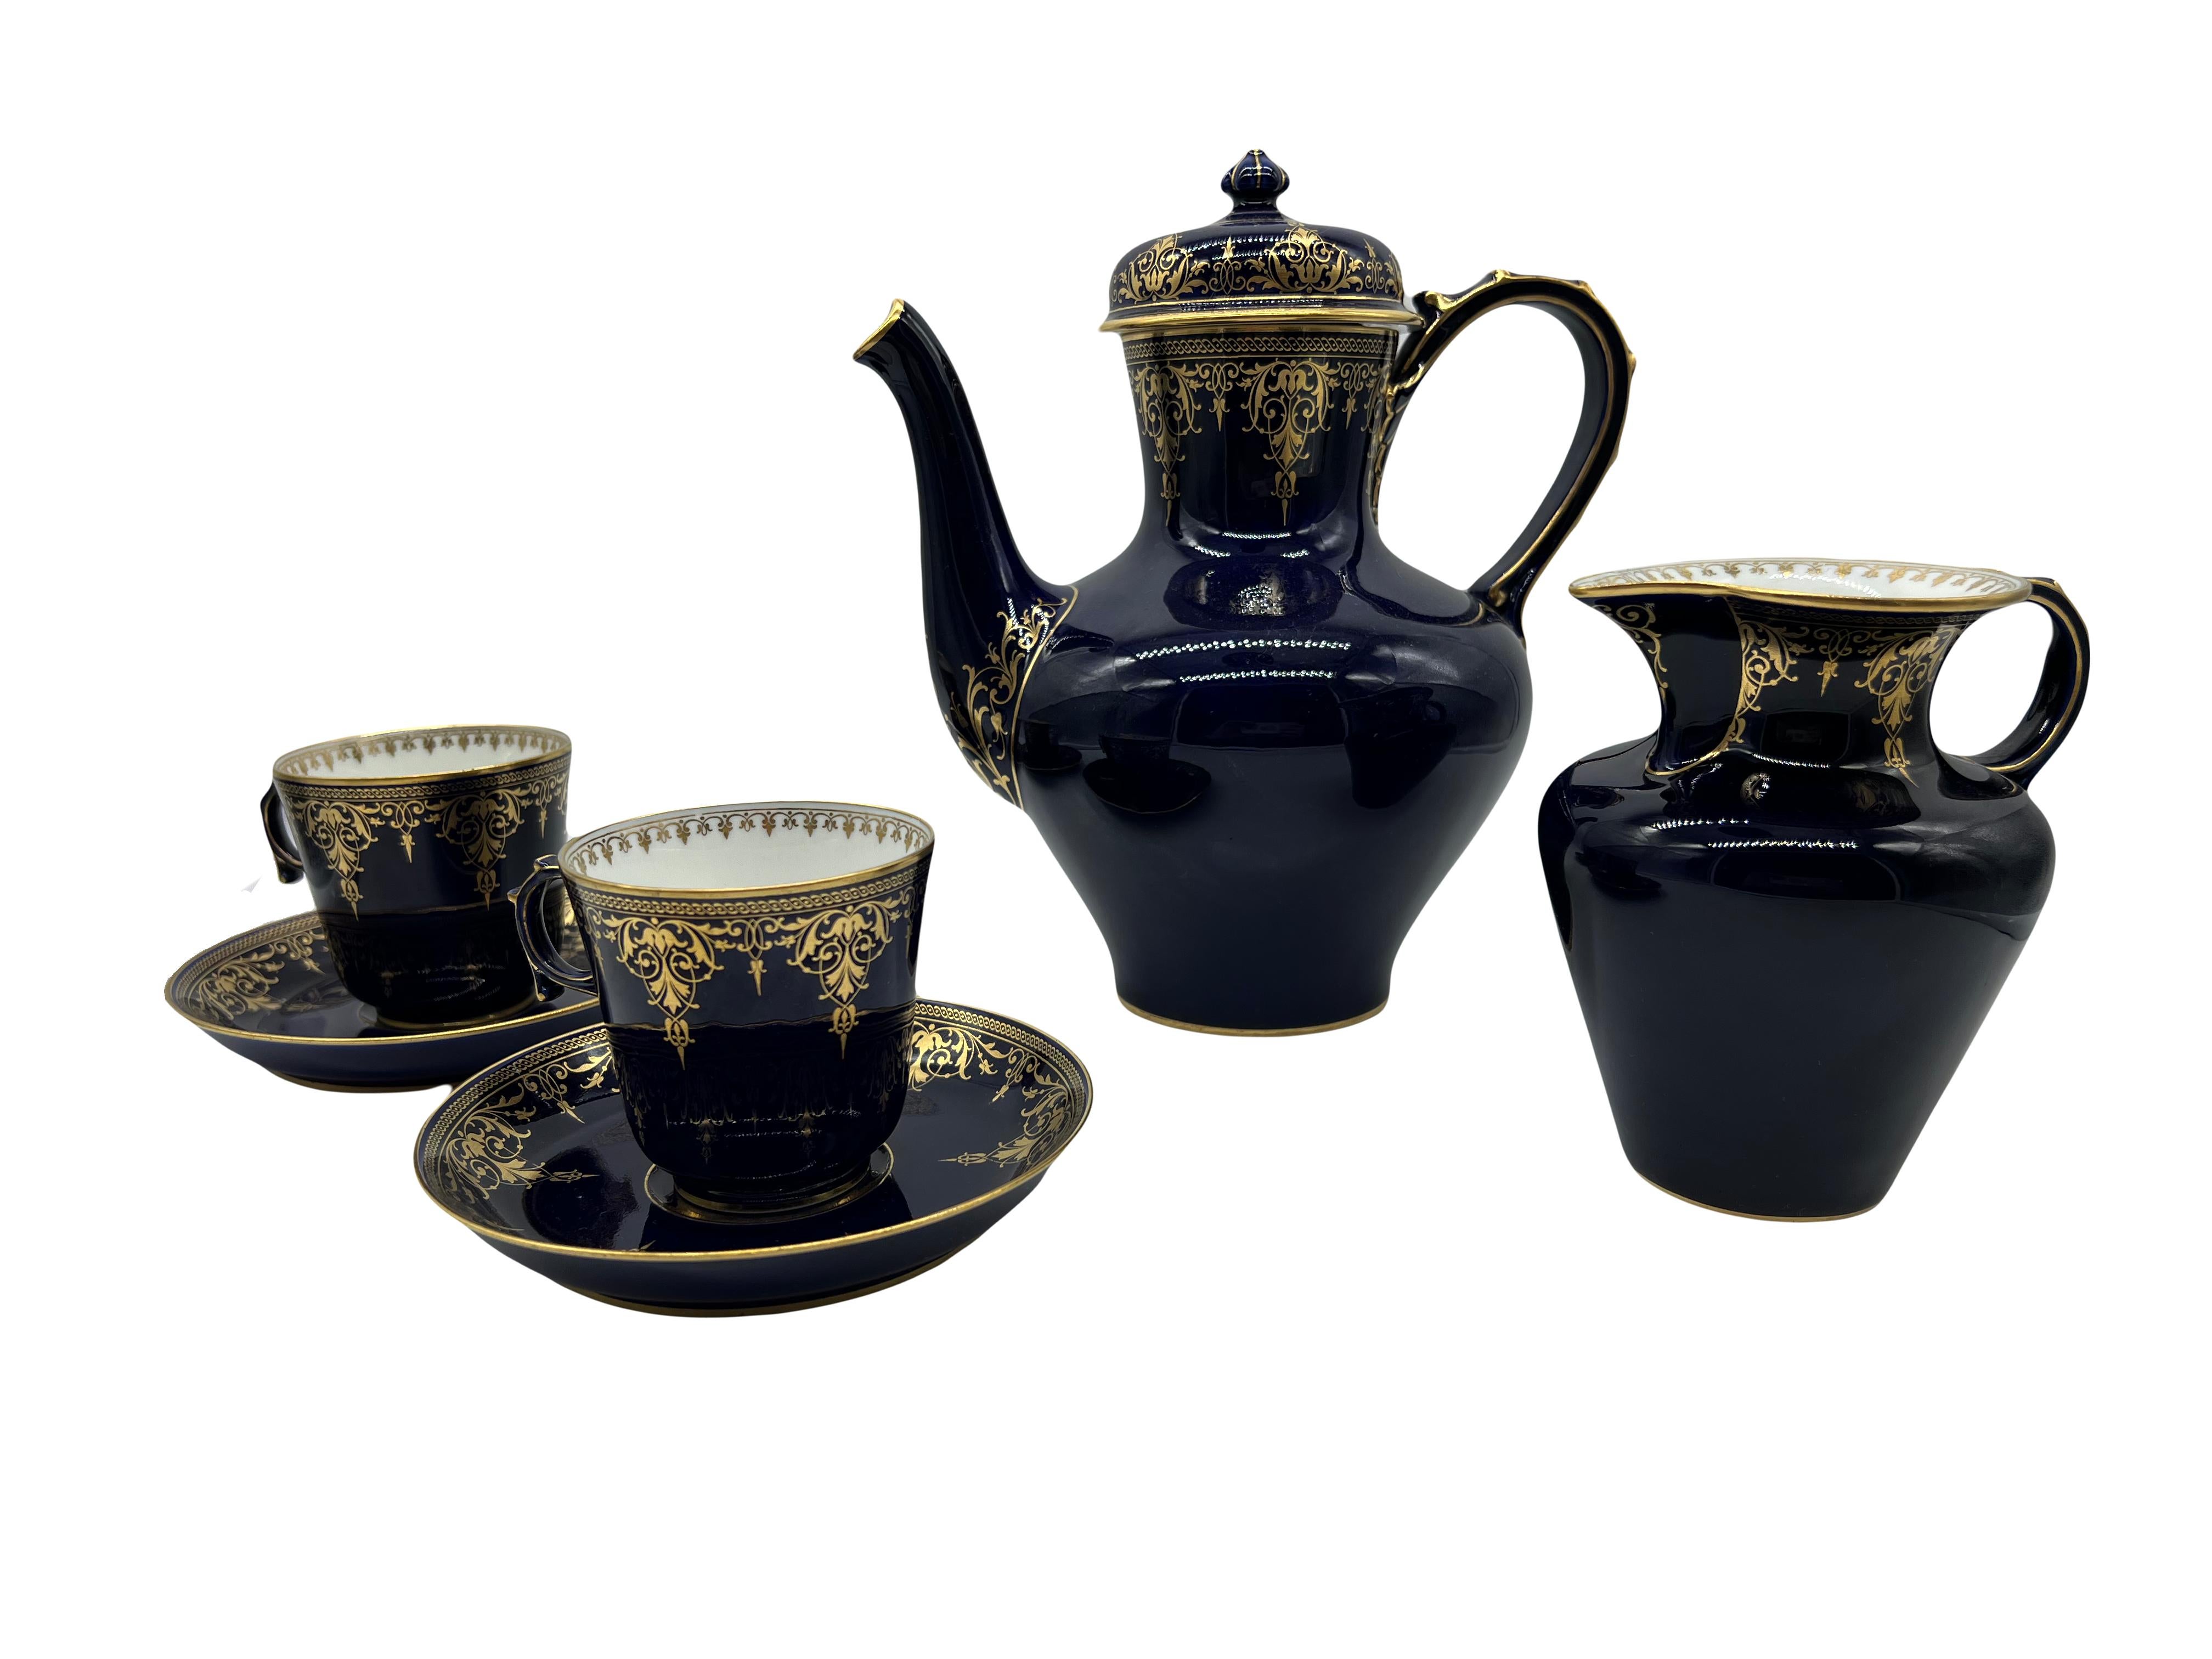 Set comprising a covered coffee pot, a milk jug, and two cups and their saucers
Porcelain cup and saucer decorated with golden lambrequins on a midnight blue background.
Signed and dated 1870 and 1889

Sèvres stamp:
Cups: S70 / S74, gilded 76.